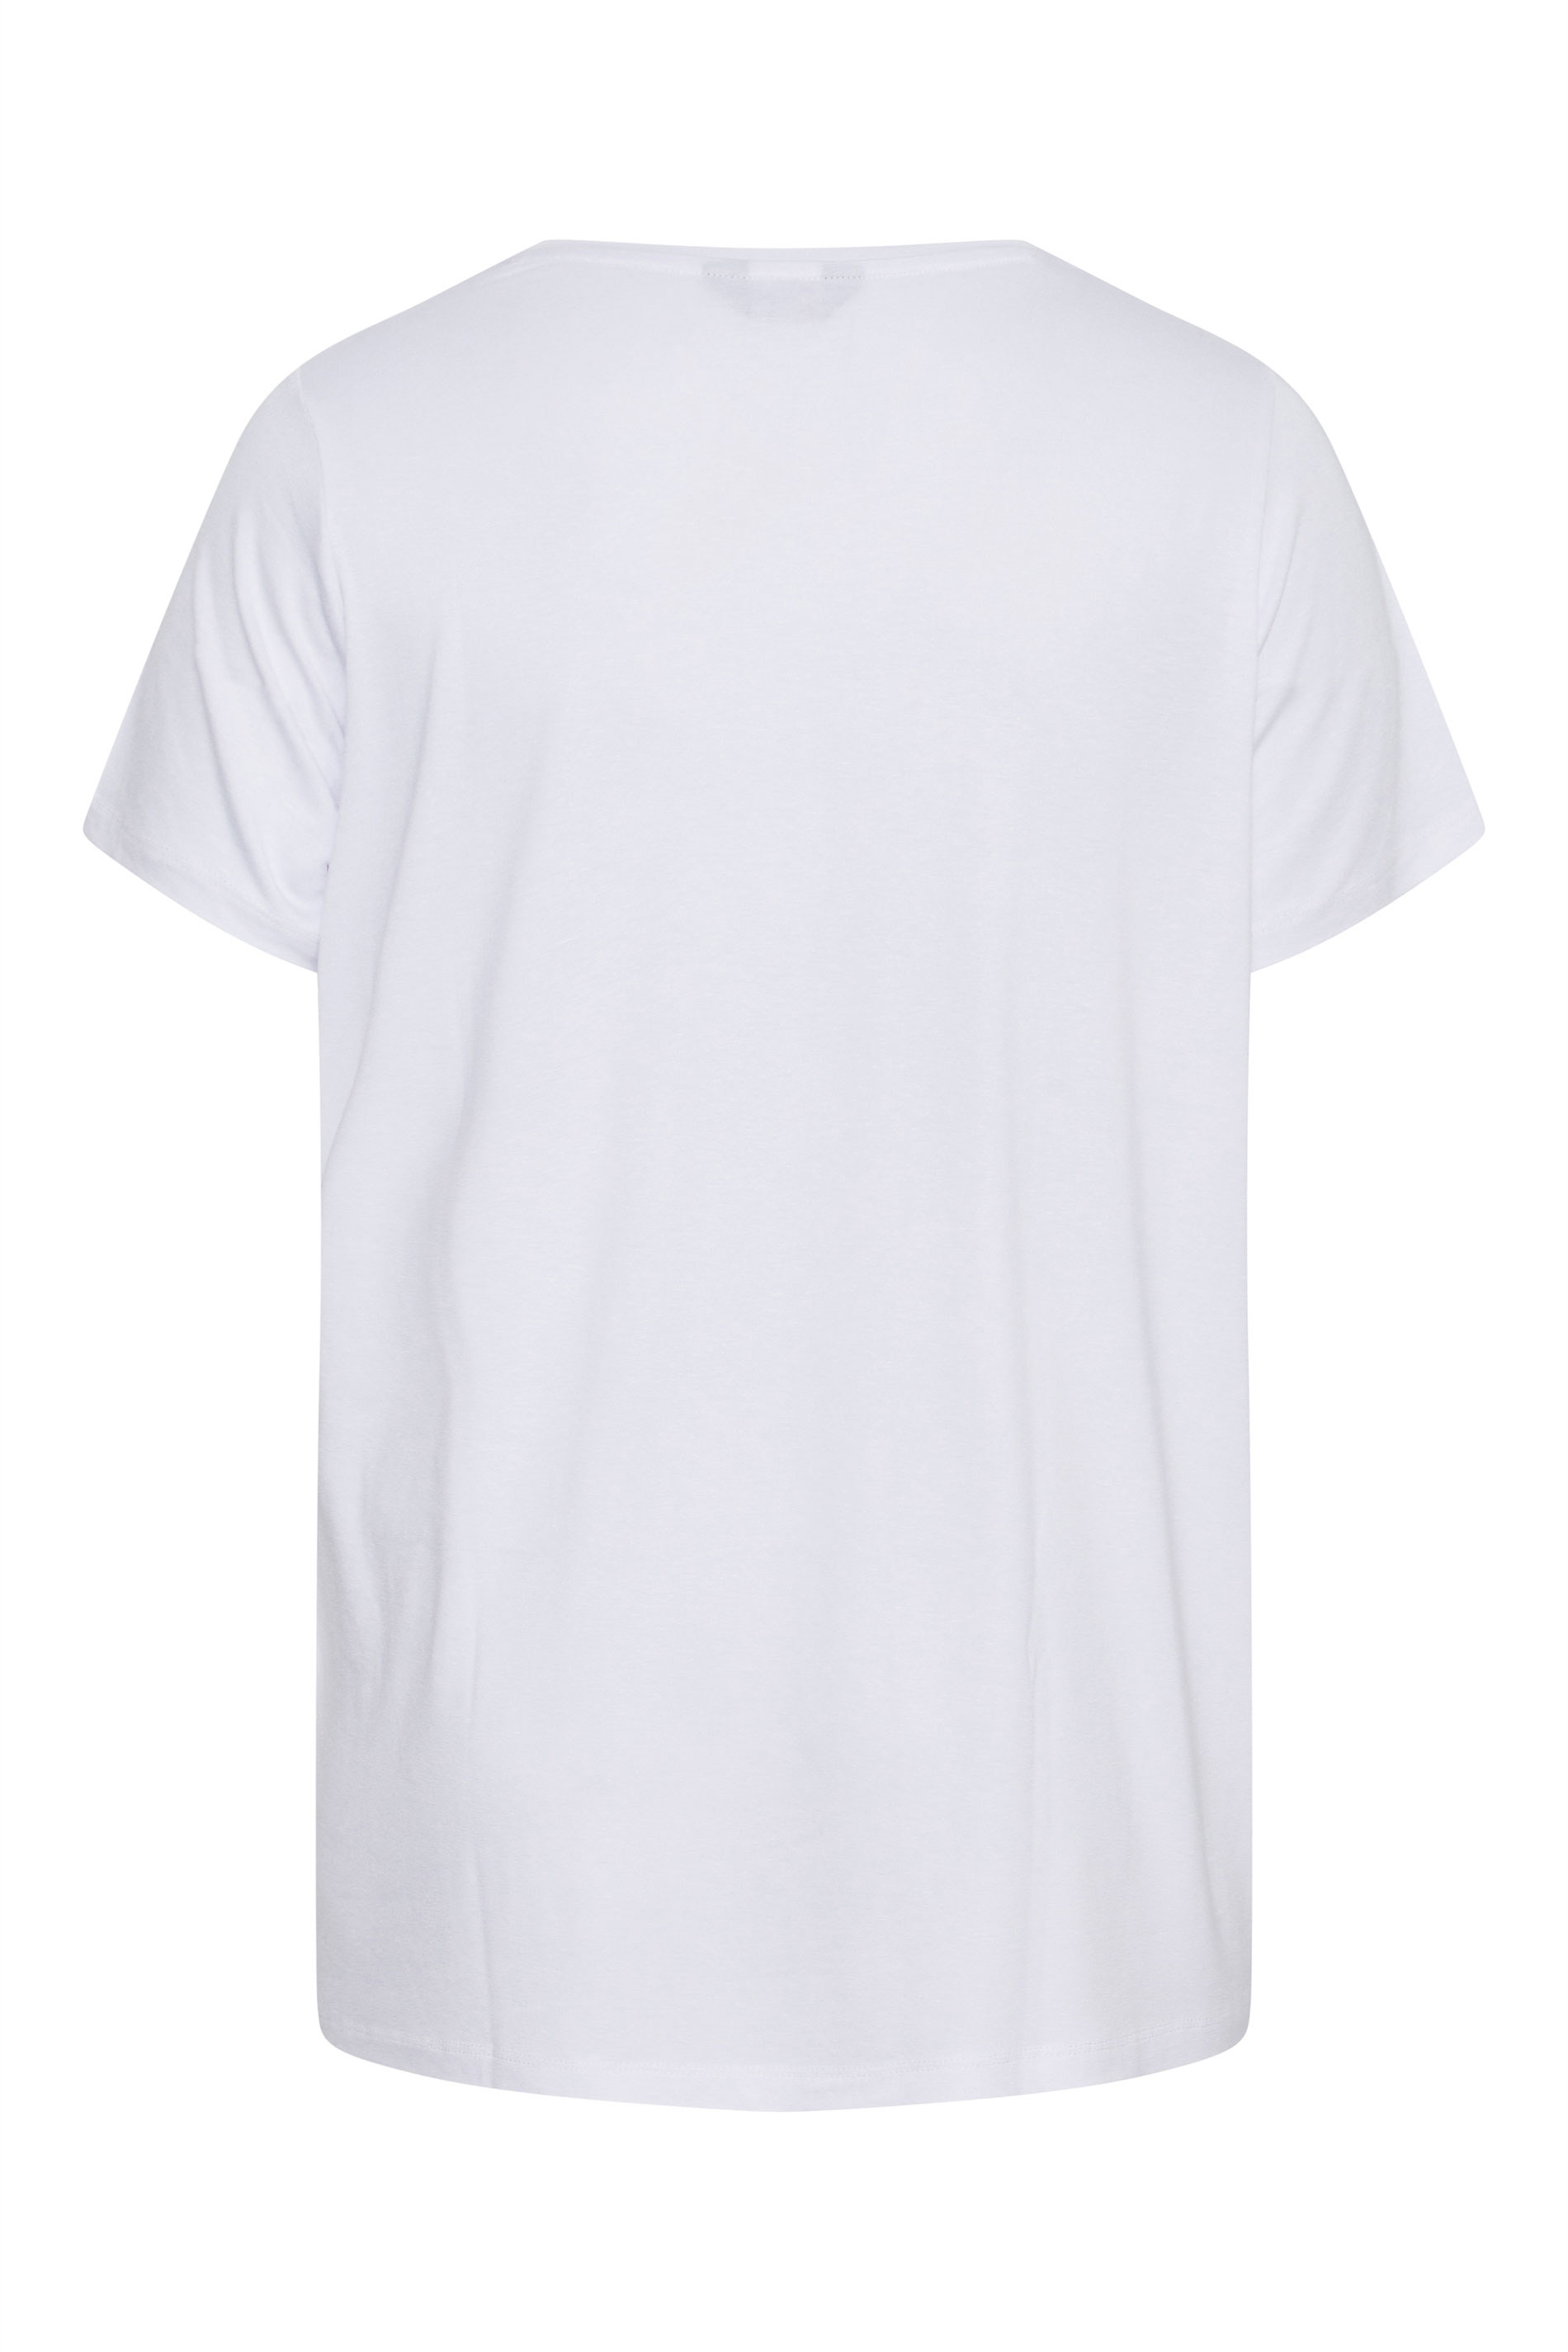 Grande taille  Tops Grande taille  Tops à Slogans | T-Shirt Blanc Papillon 'Only For You' - LQ37600